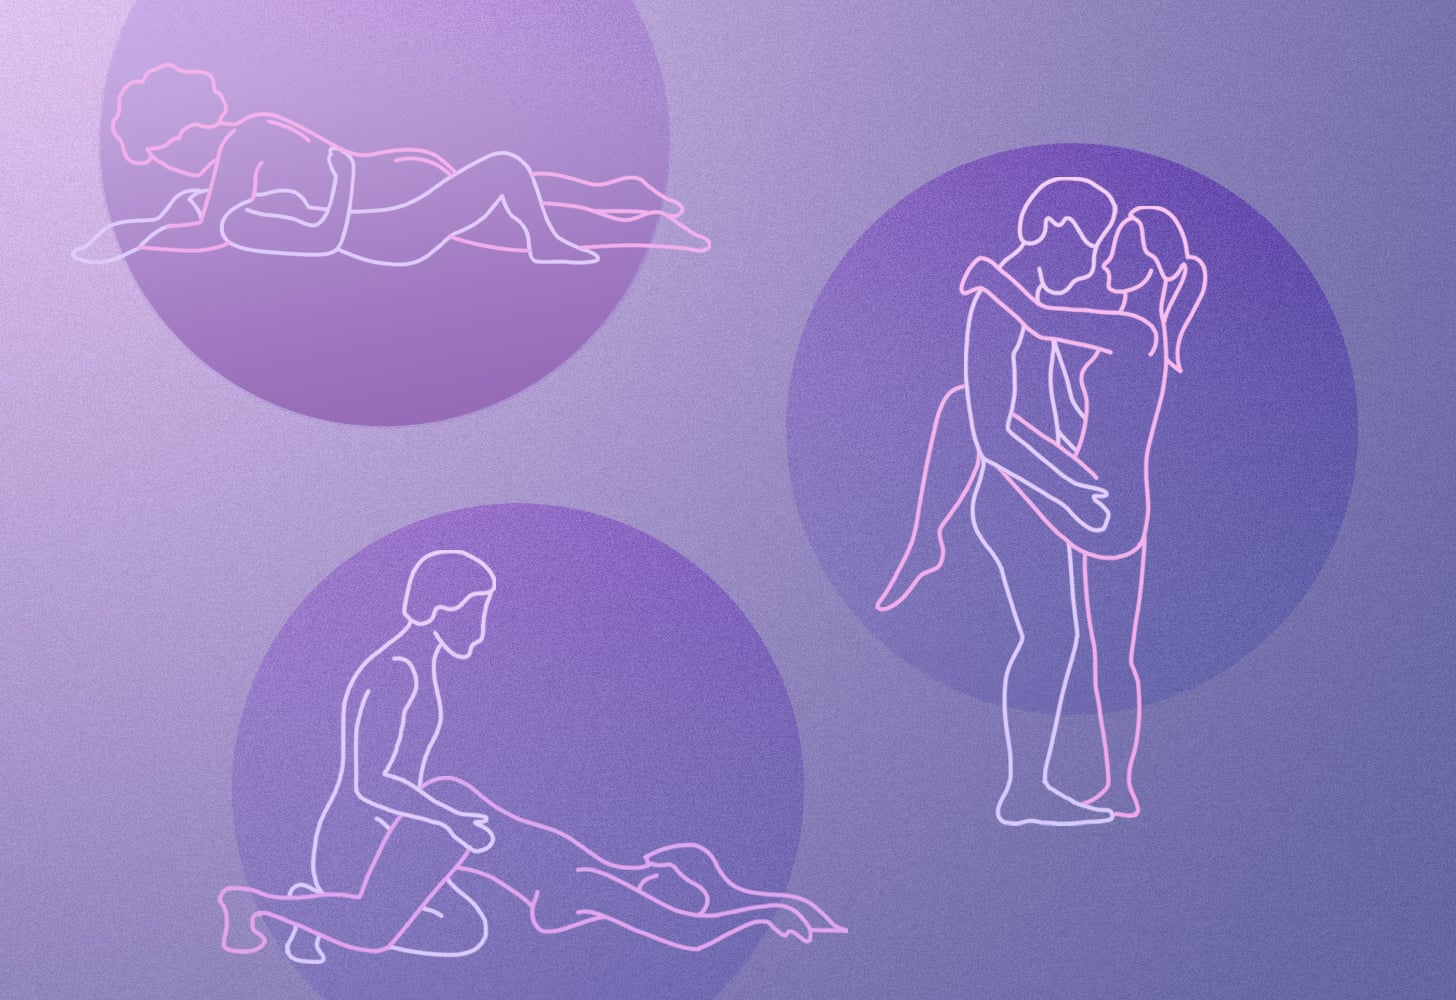 55 Different Sex Positions to Try | POPSUGAR Love & Sex